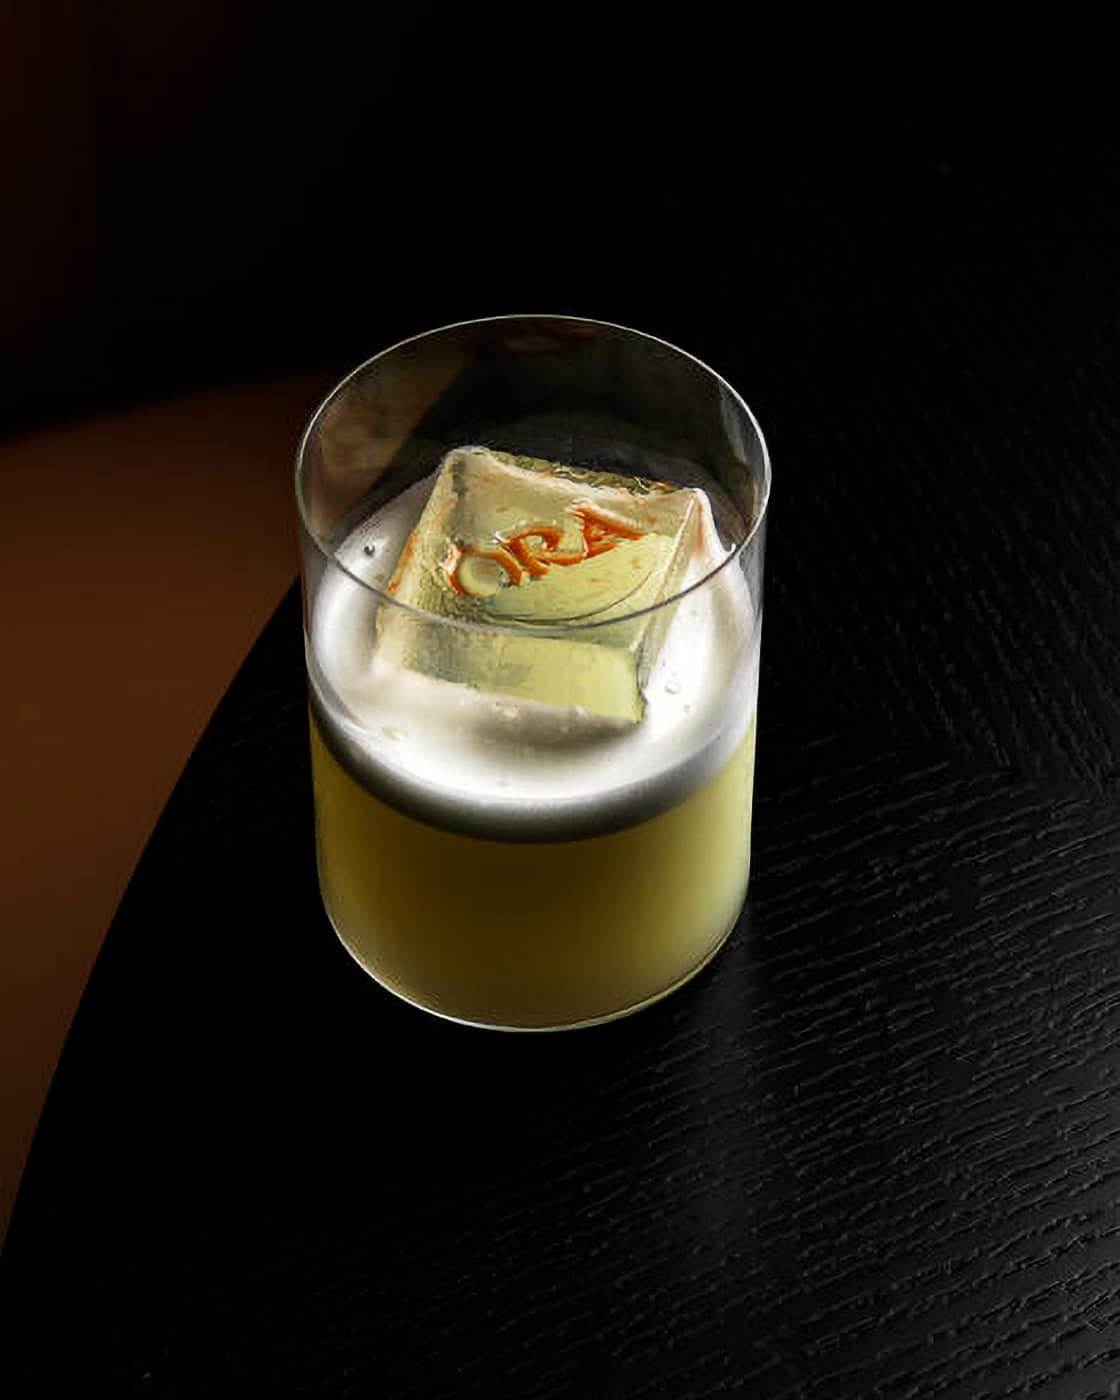 Overhead shot of a cocktail in a tumbler glass sitting on a black wooden table. The cocktail has a white foam on top of the liquid, and a large ice cube with the Ōra logo engraved into it floats in the glass.